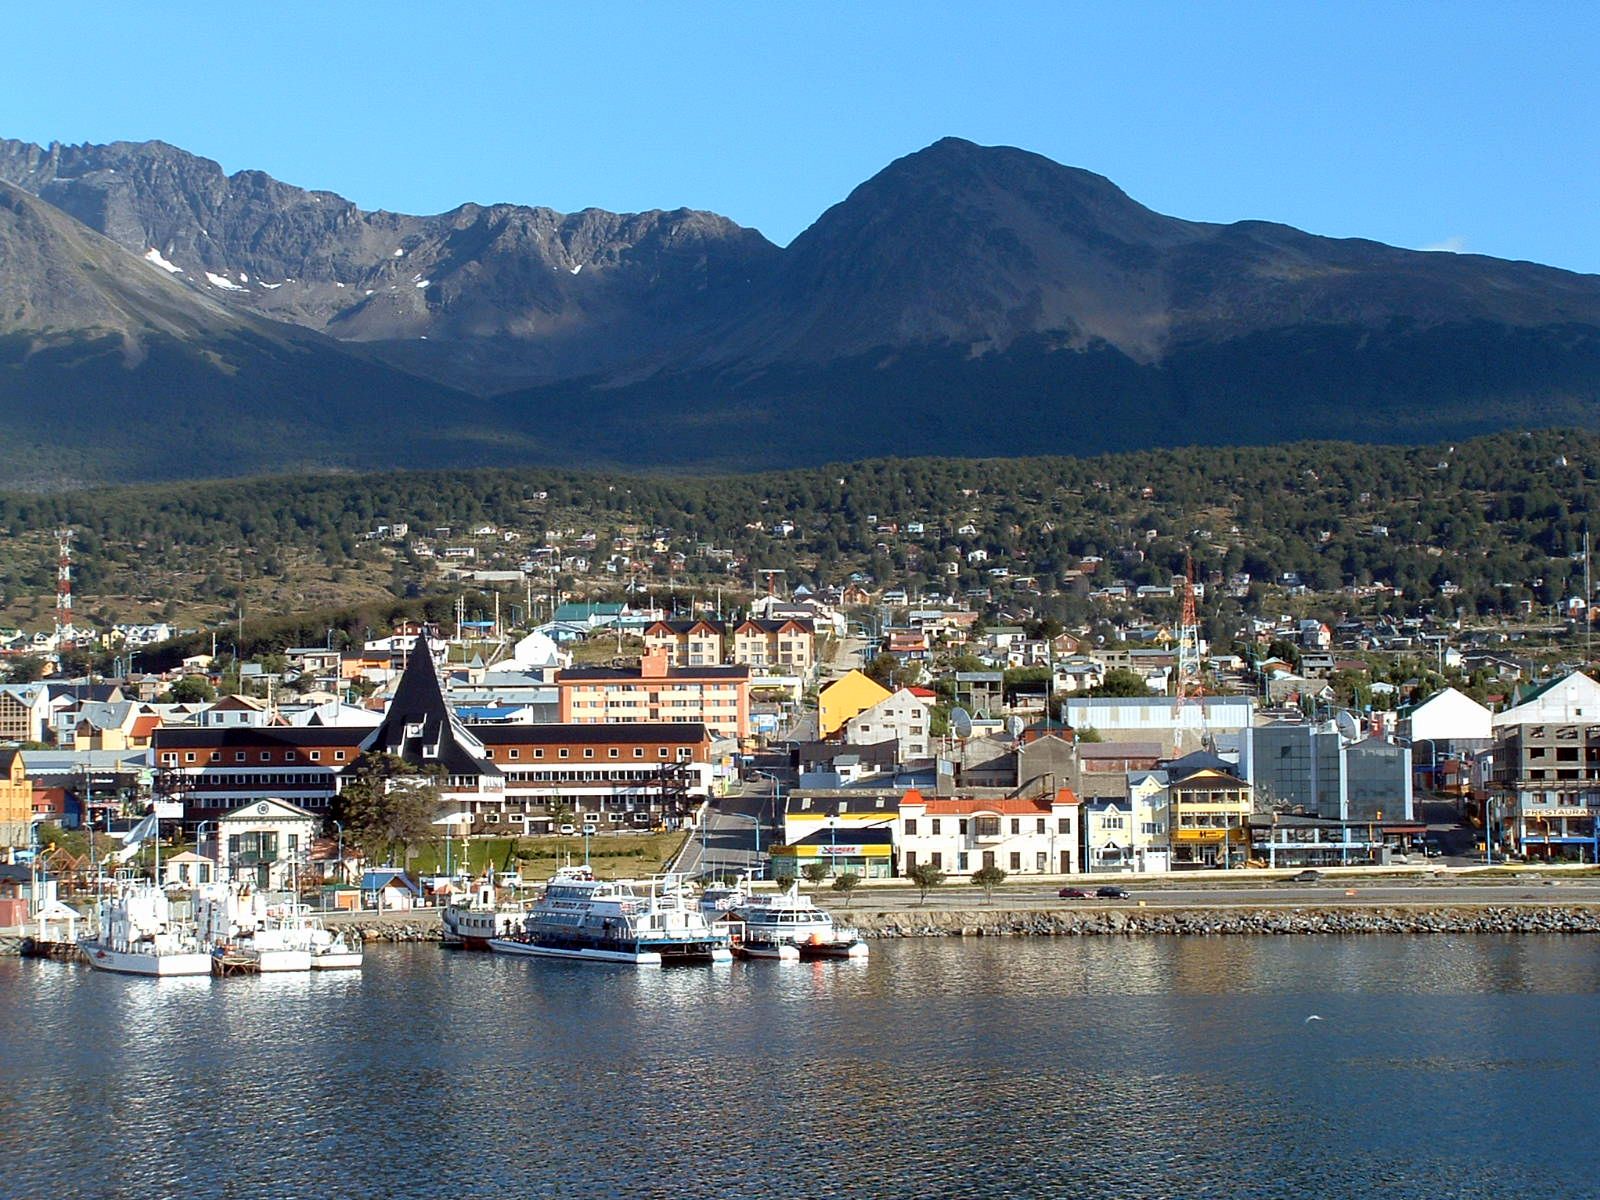 Ushuaia, Argentina - City at the End of the World